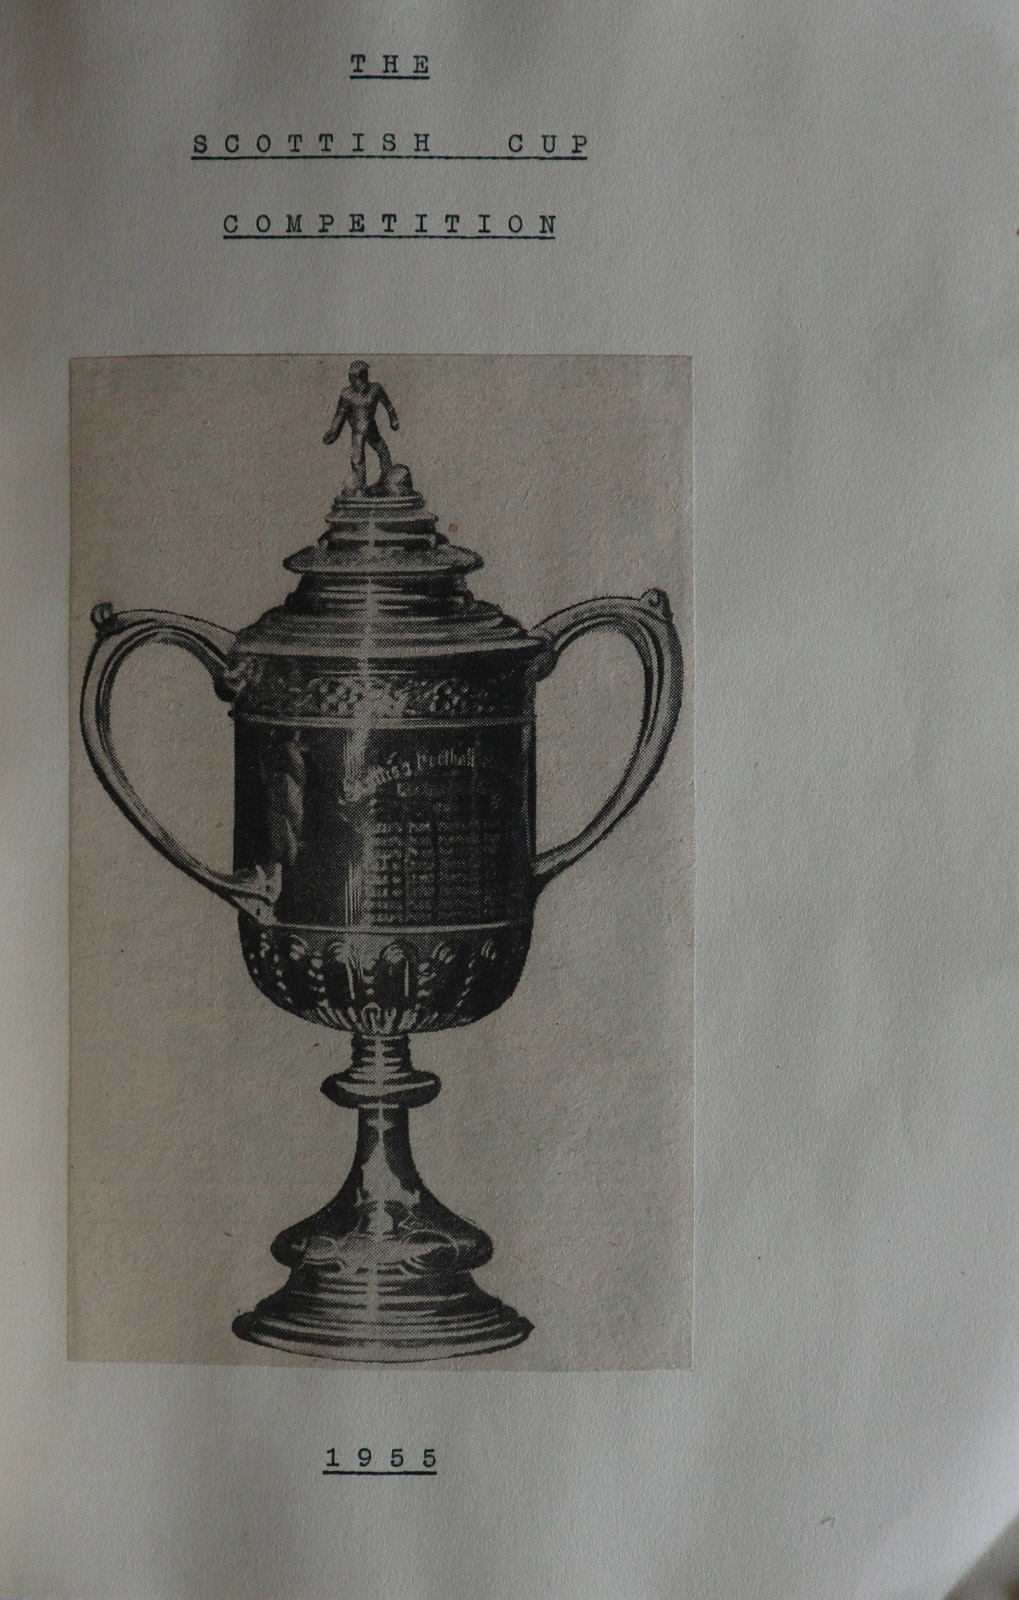 cup1955_004